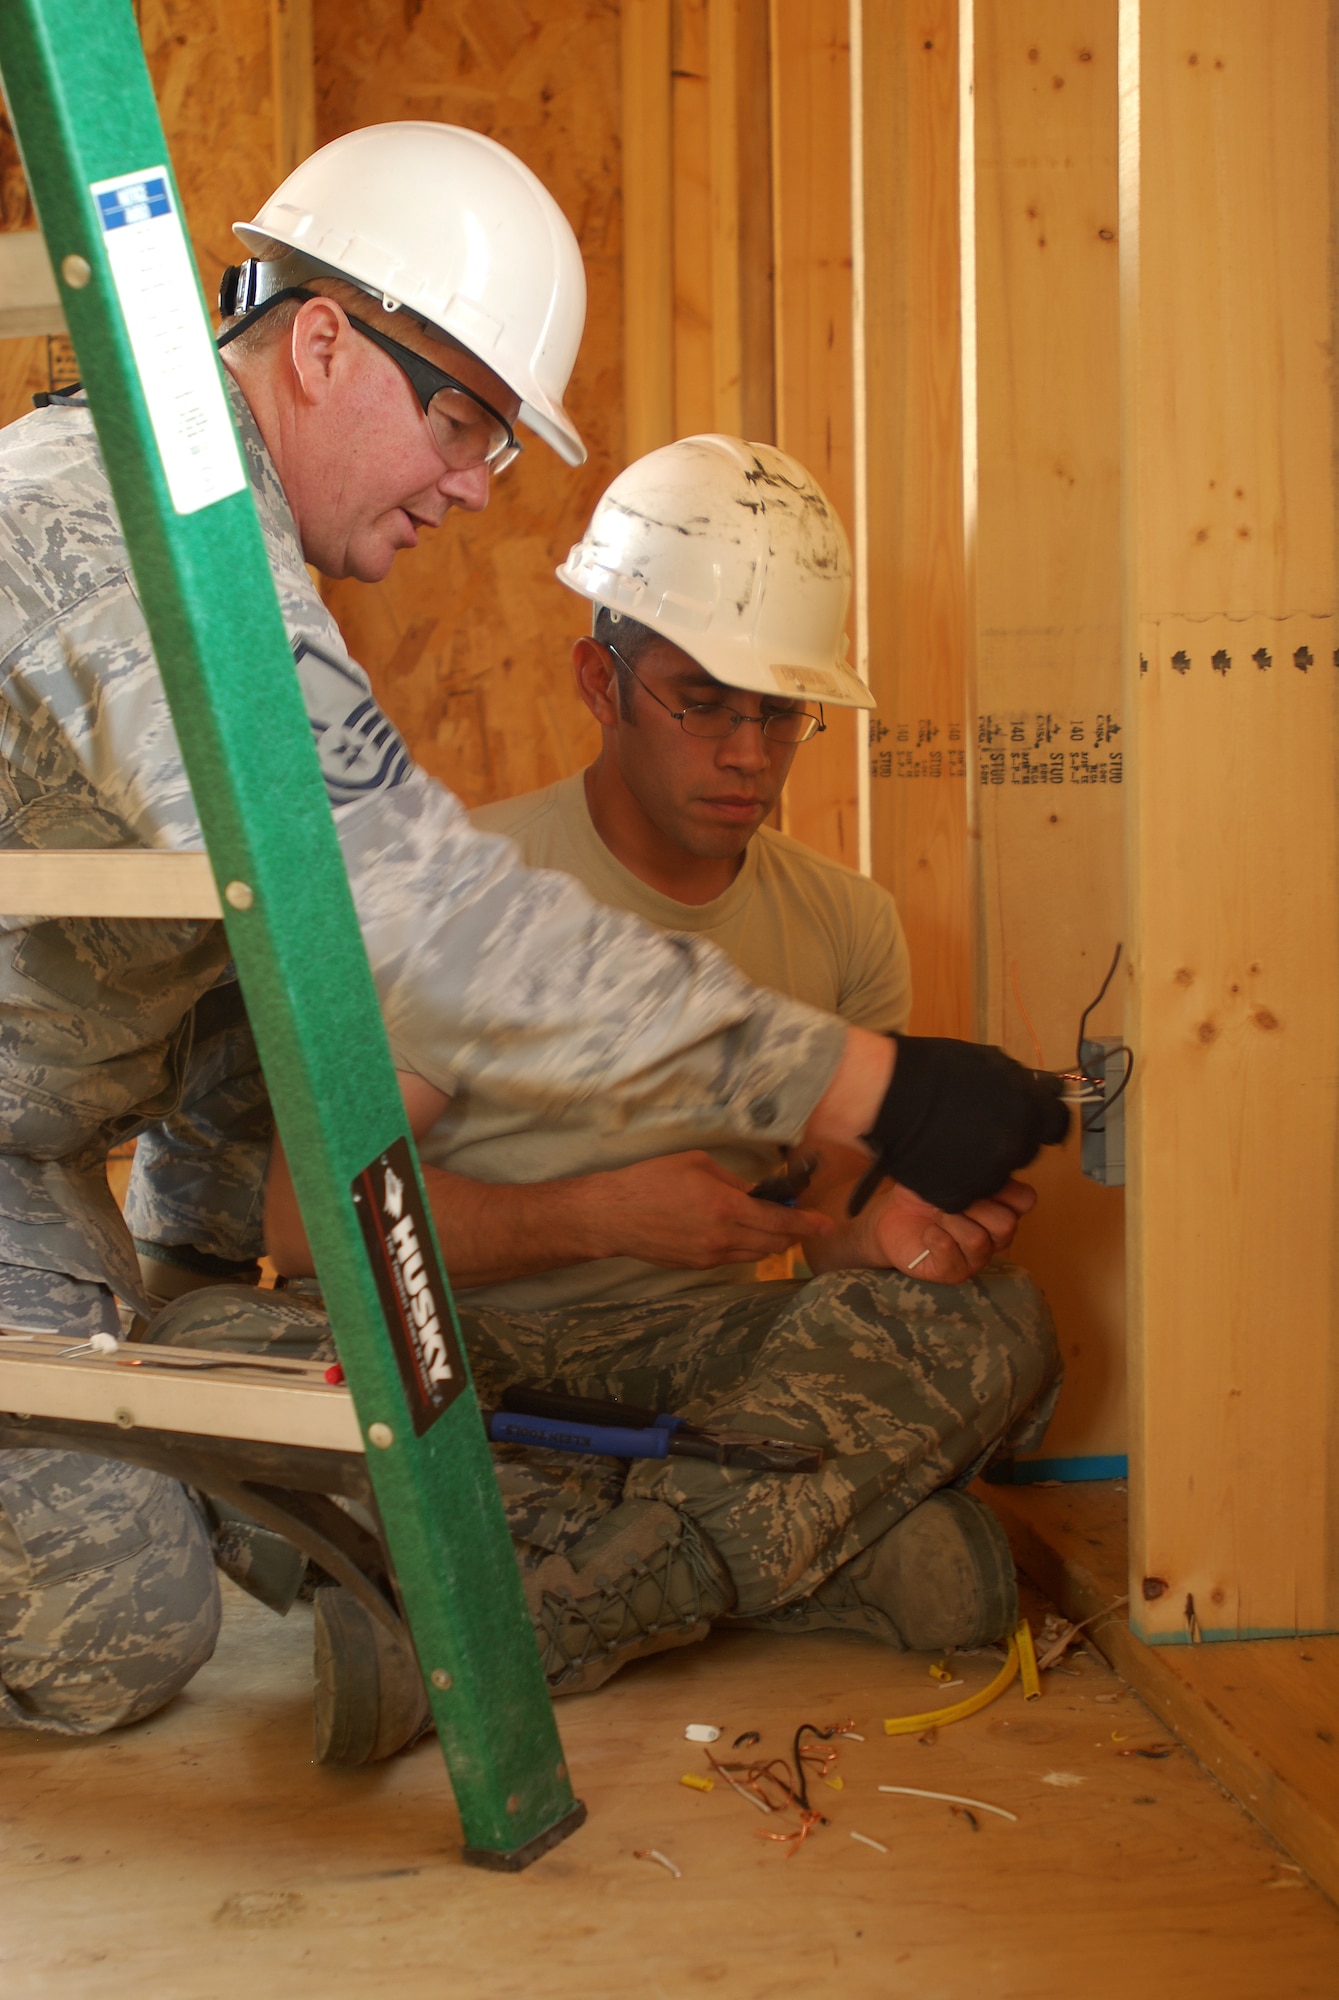 Members of the 433rd Civil Engineering Squadron conduct a humanitarian mission in the Red Lake Indian Reservation for the Red Lake band of Chippewa Indians, just outside of Bemidji, Minnesota. Master Sgt. Curtis Wilson, 433rd CES, gives some wiring advice to Staff Sgt. David Bustos. (U.S. Air Force photo/Airman 1st Class Brian McGloin)